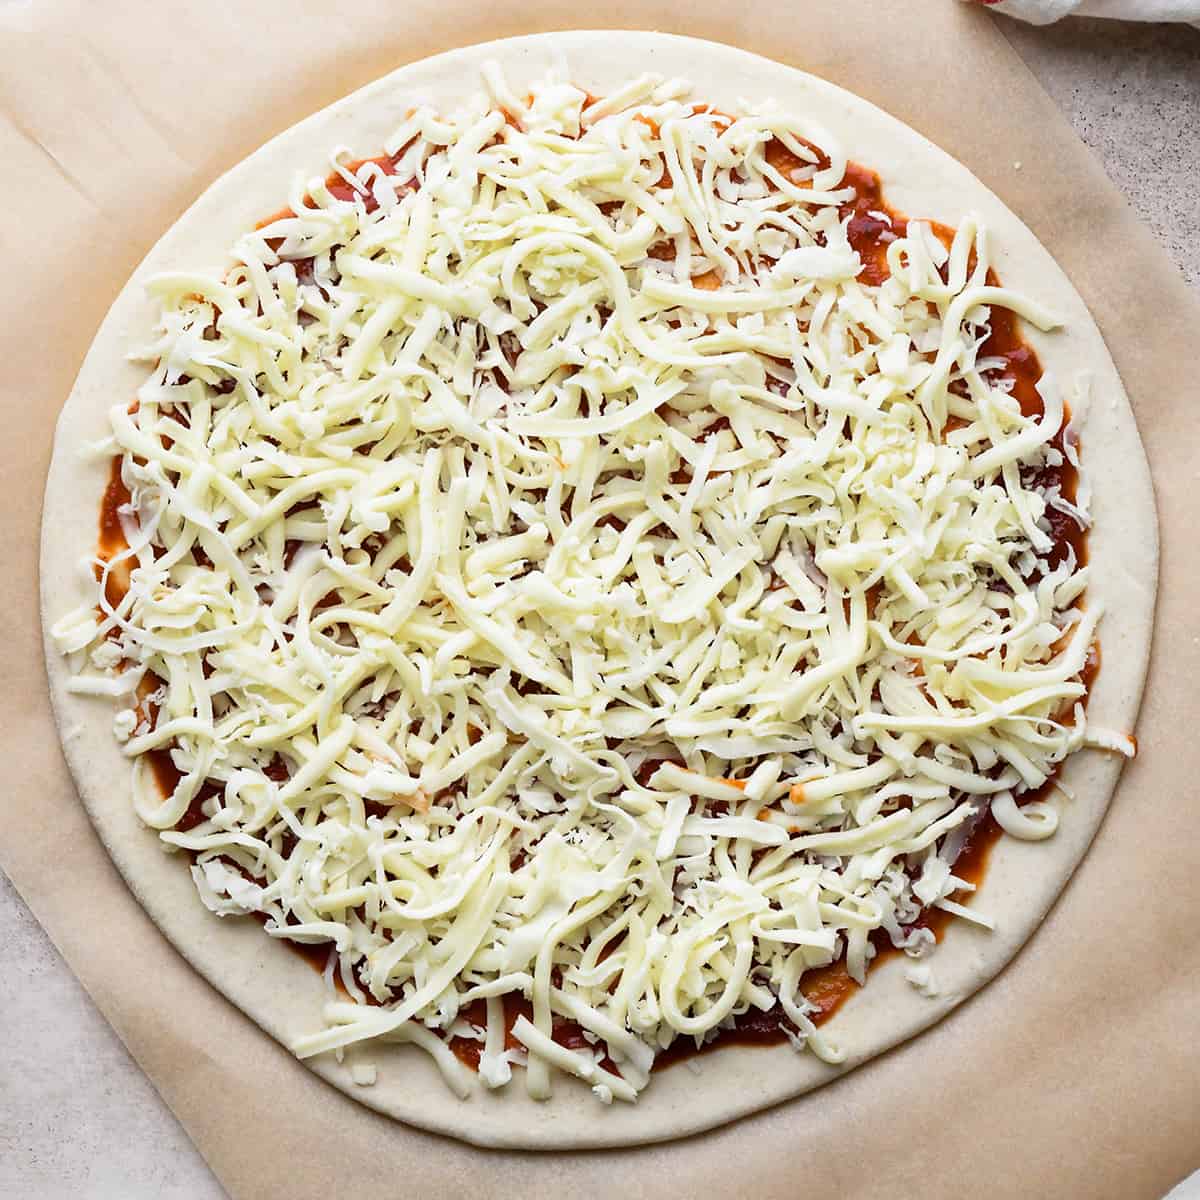 How to Make Pepperoni Pizza - putting cheese on top of sauce